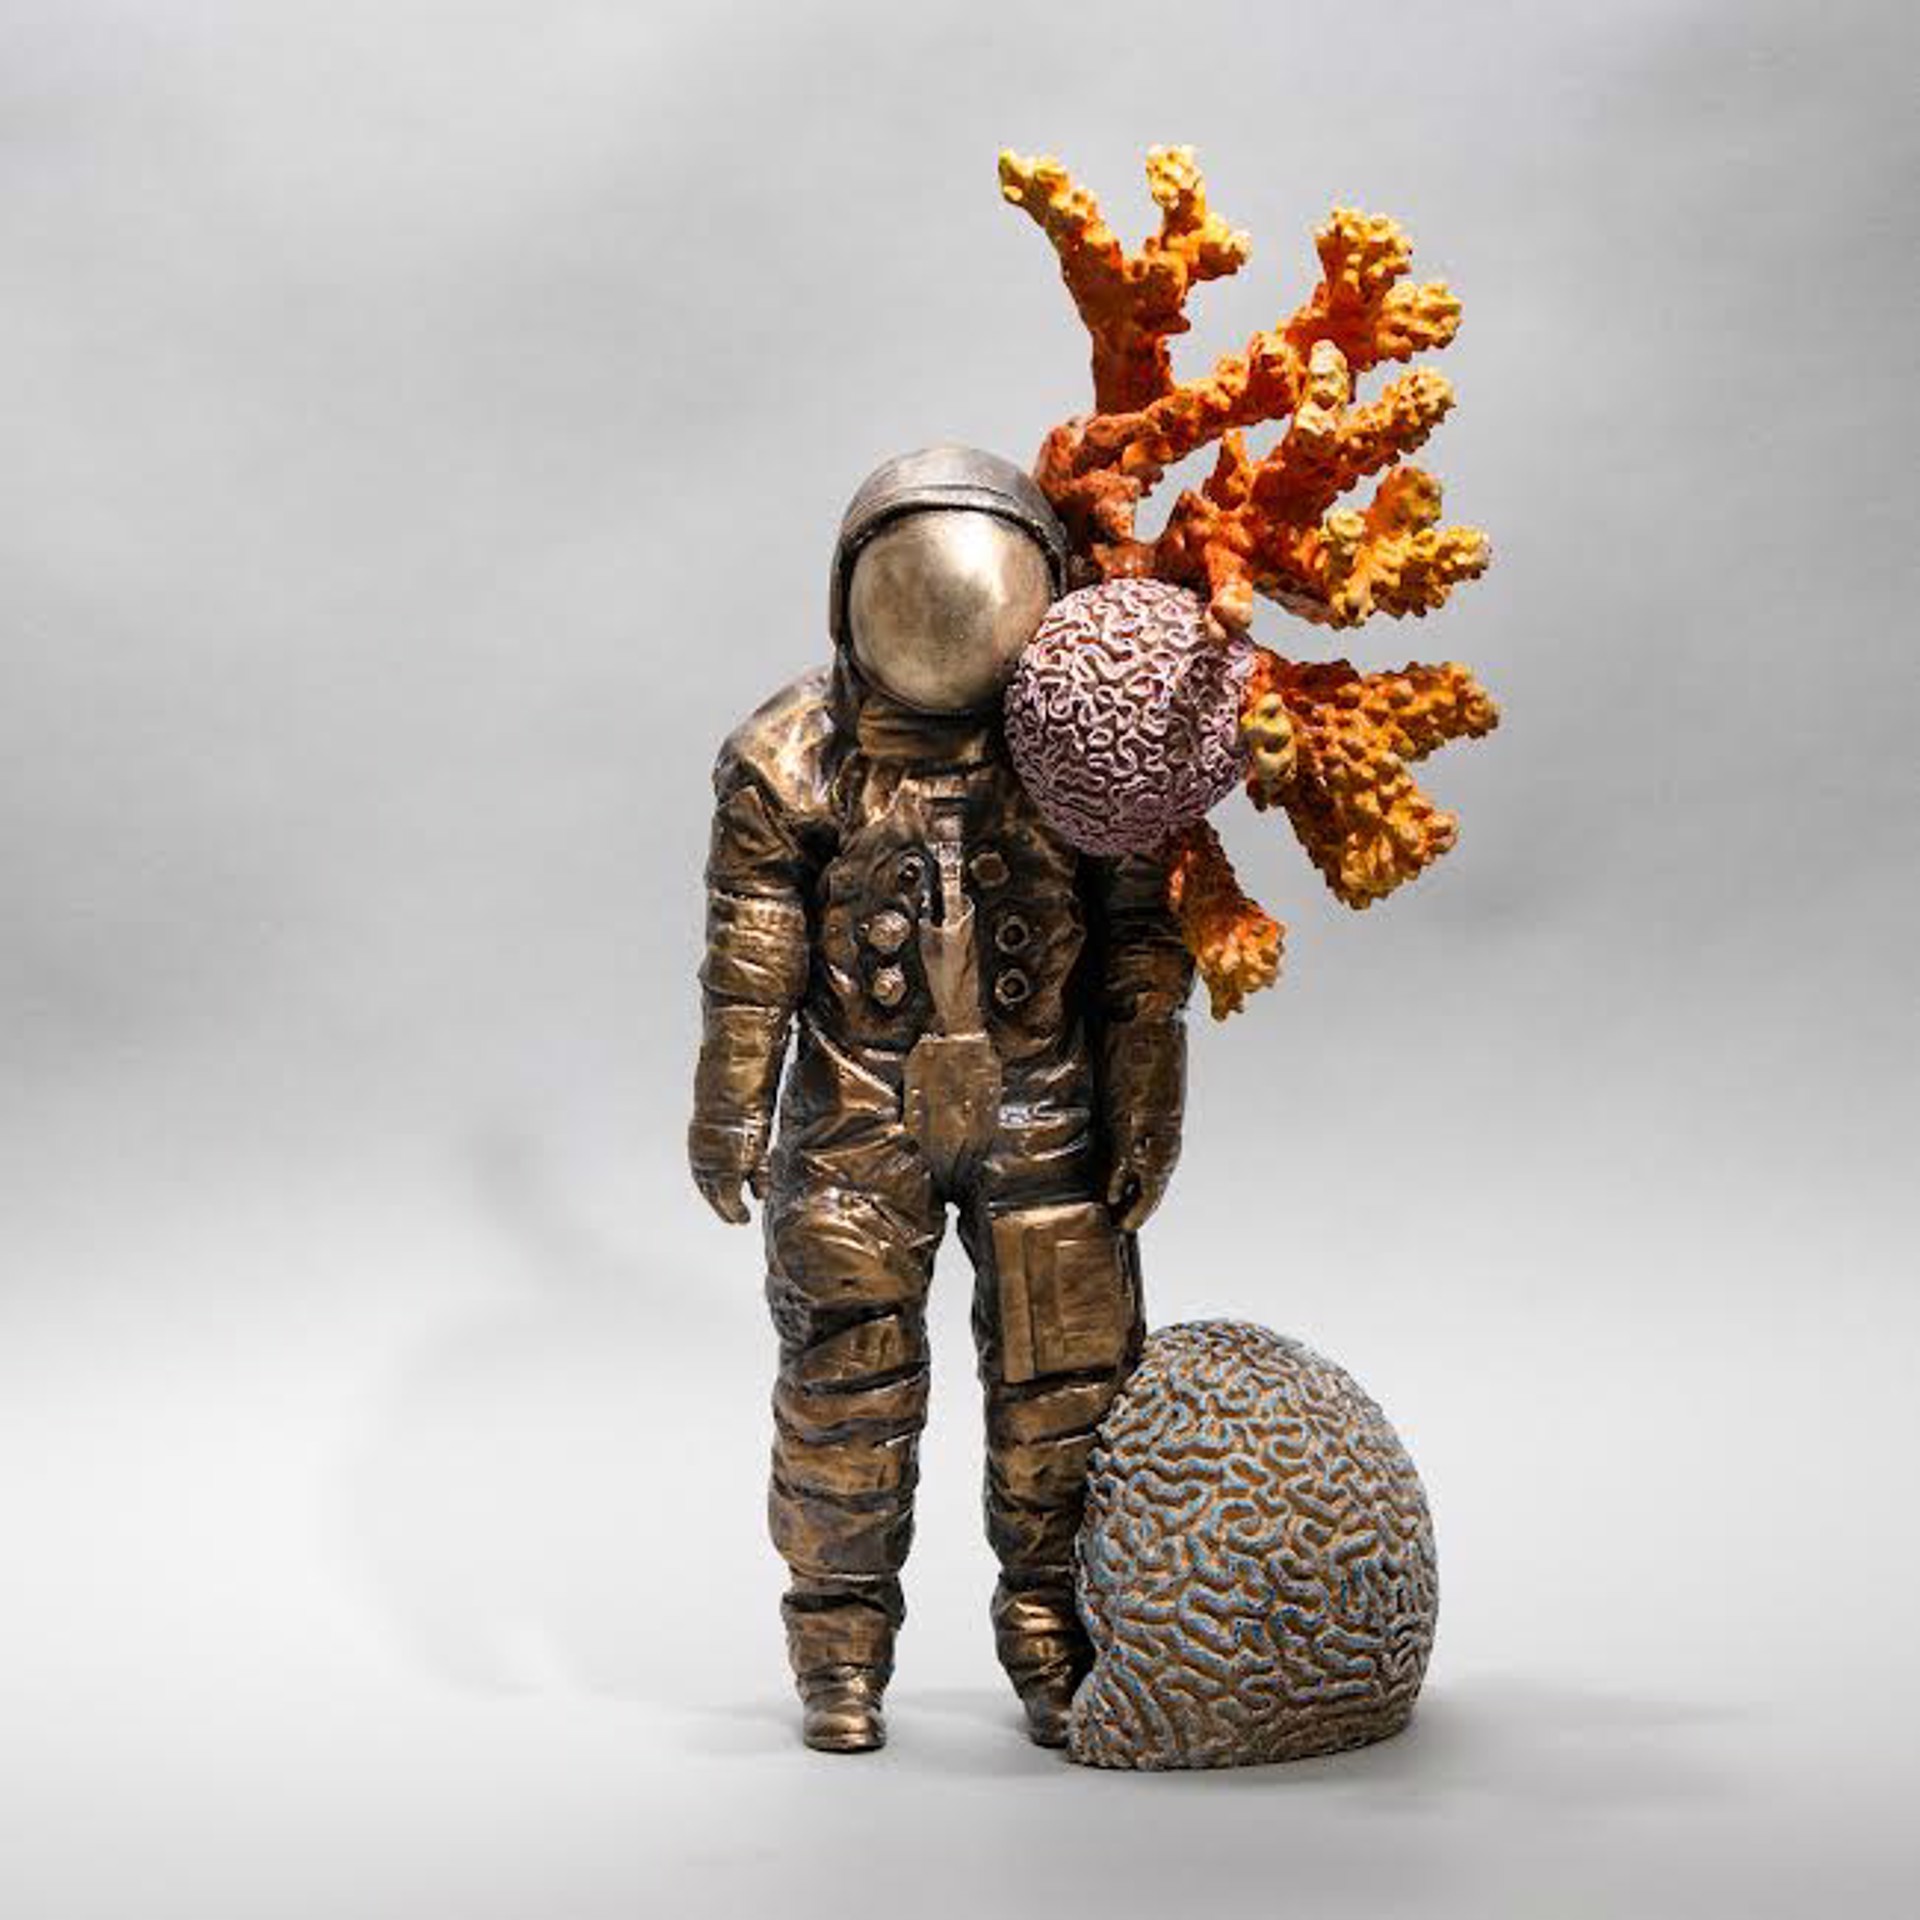 "Spaceman Coral 4" by Dana Younger